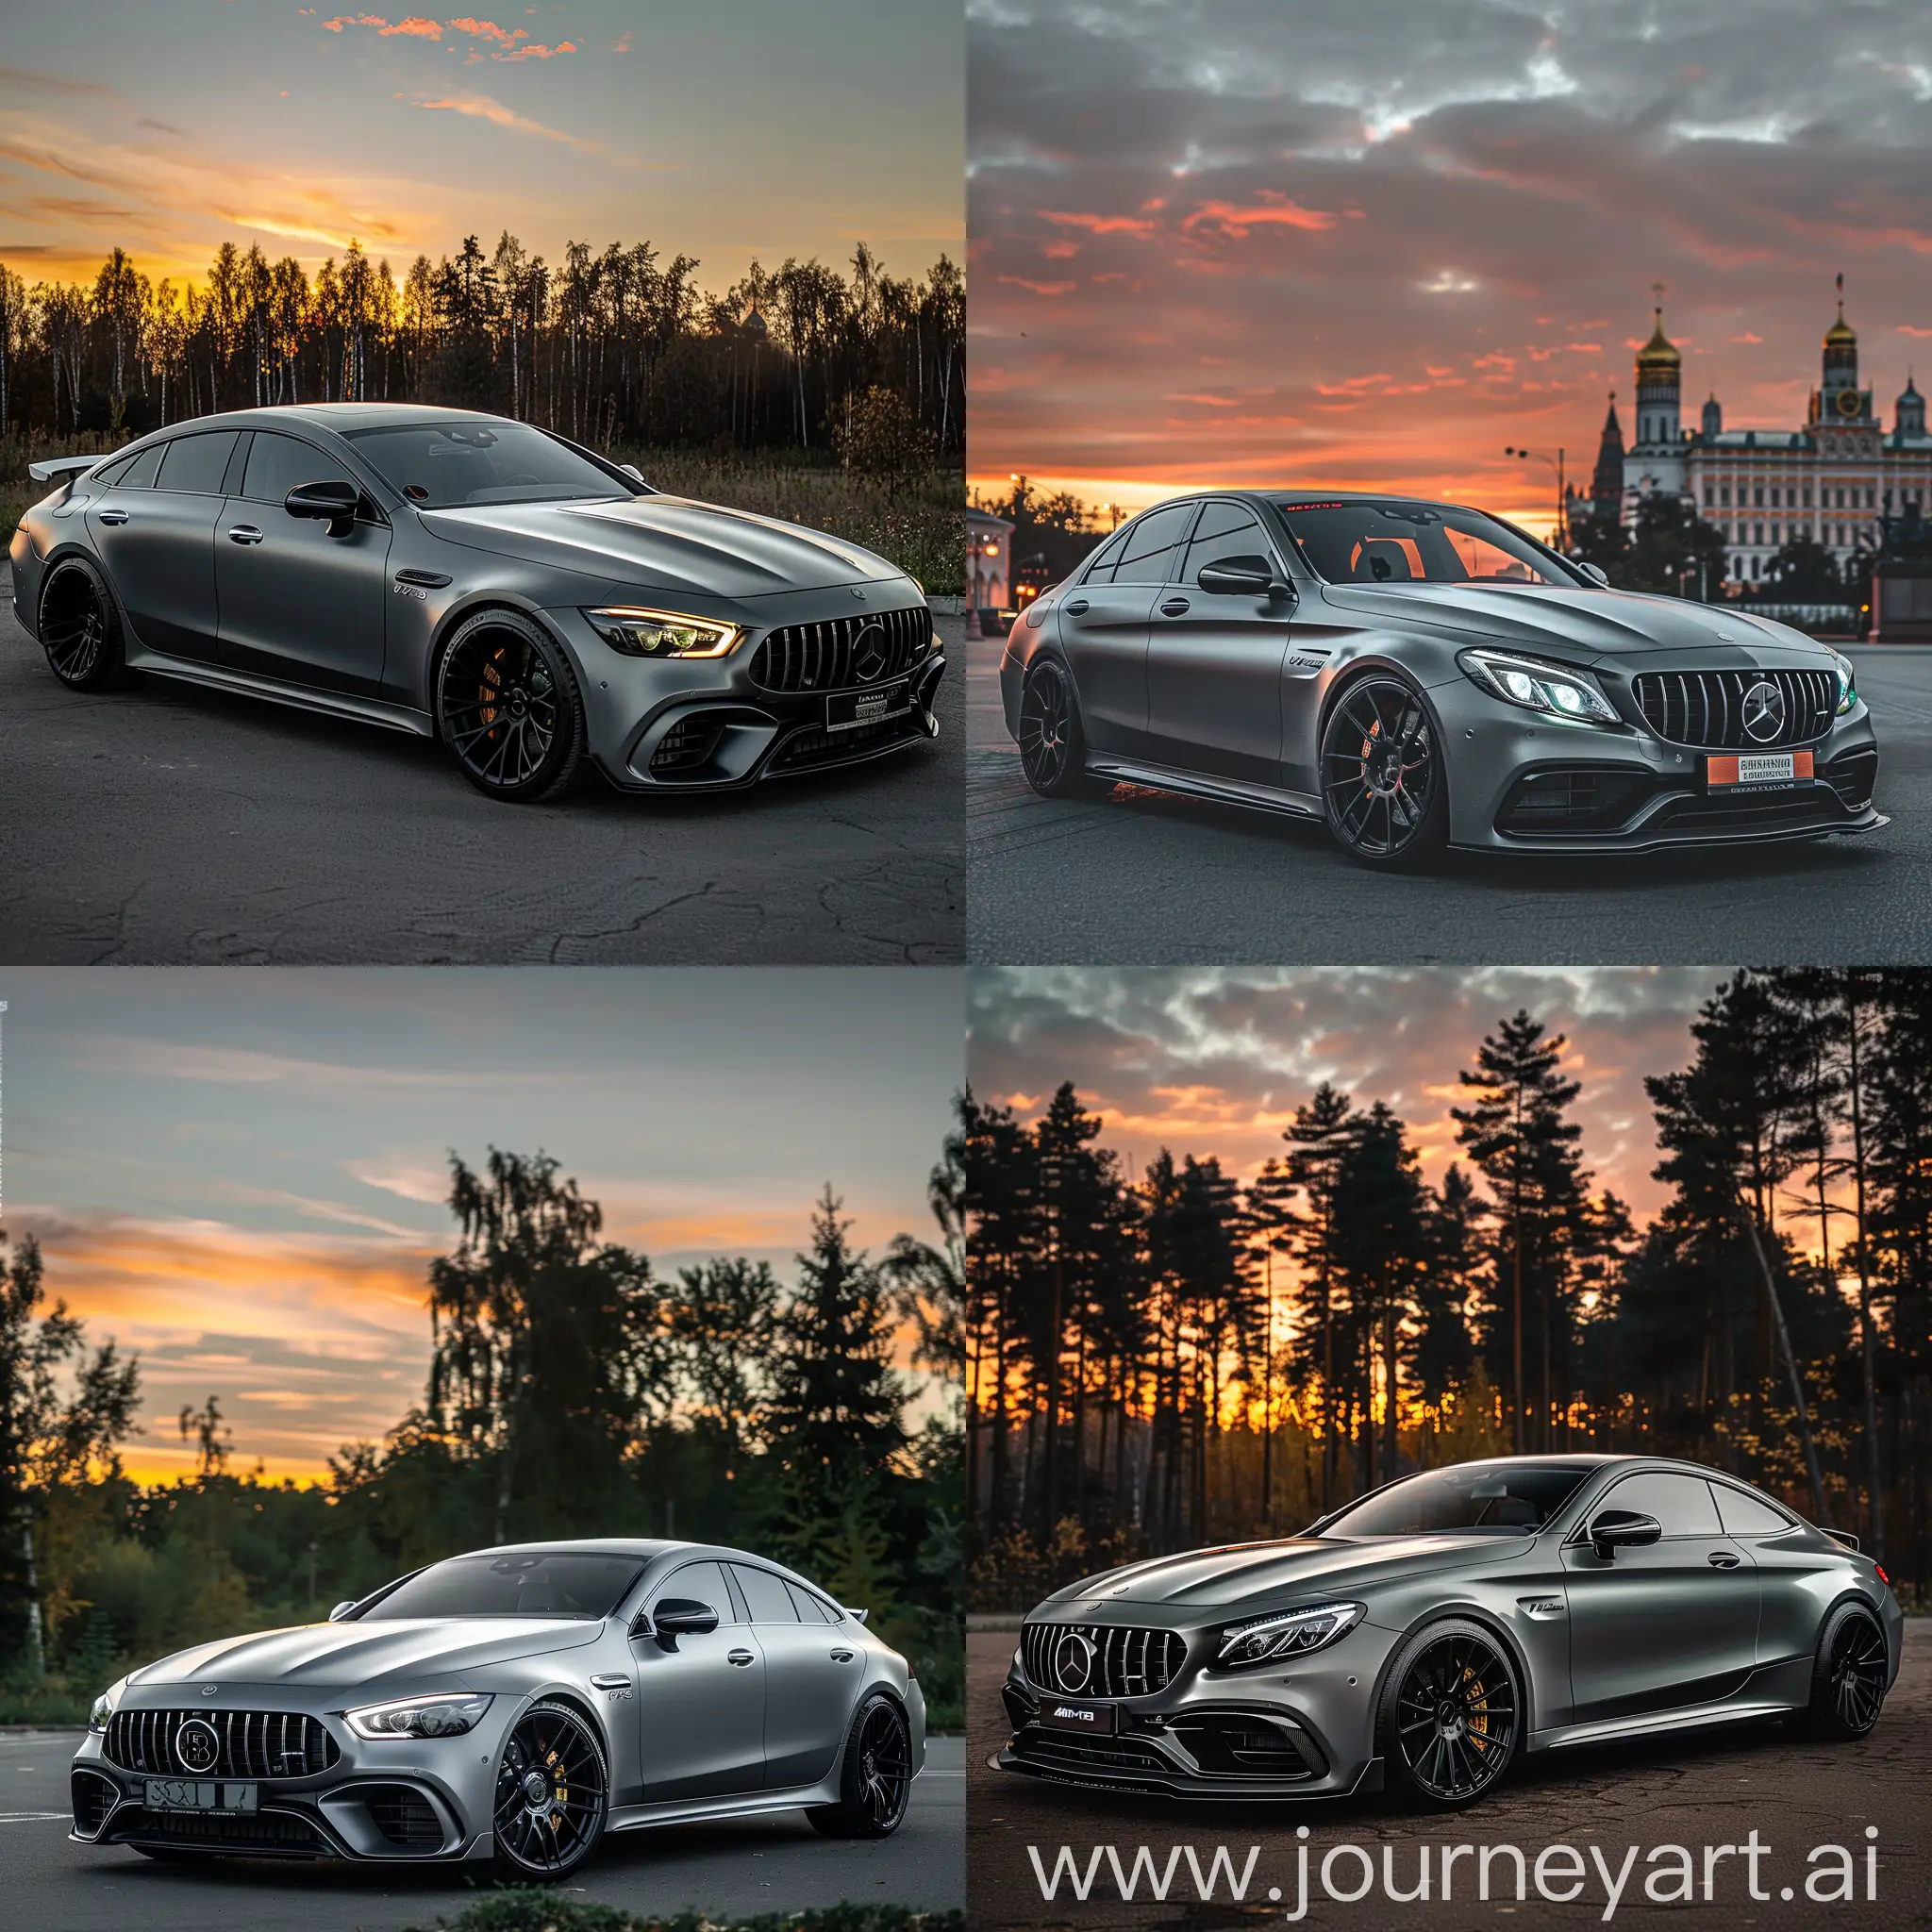 Luxurious-Mercedes-GT63S-Brabus-2020s-Parked-at-Moscow-Sunset